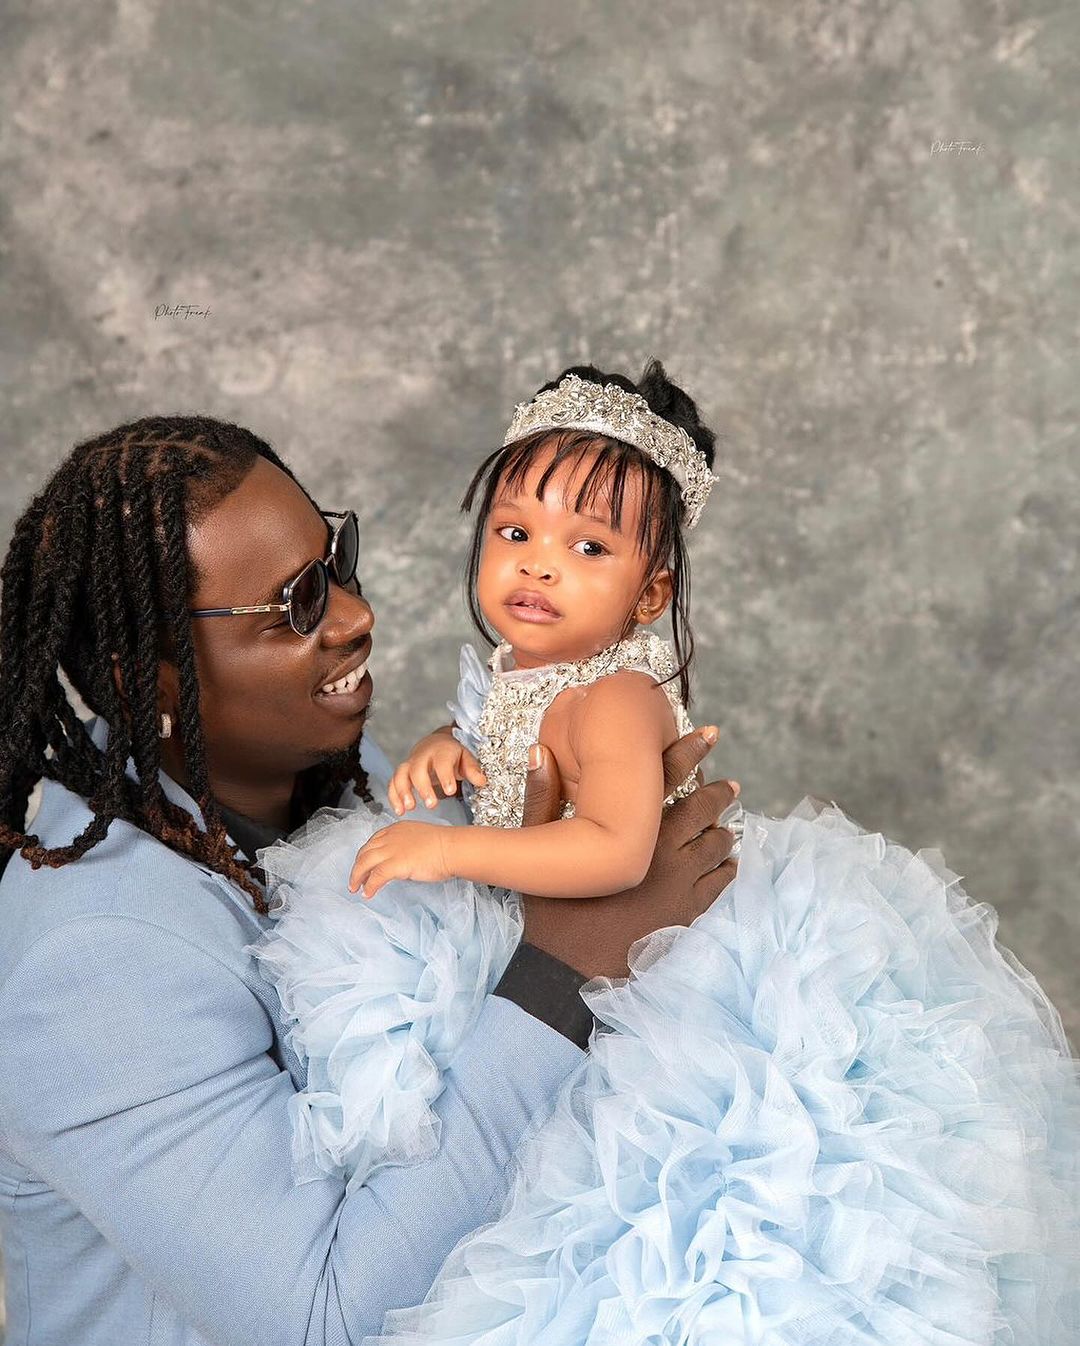 "E P@in Am"- Netizens react as Lord Lambo shares photos of himself & child with Queen Atang, hours after she announced her engagement to another man